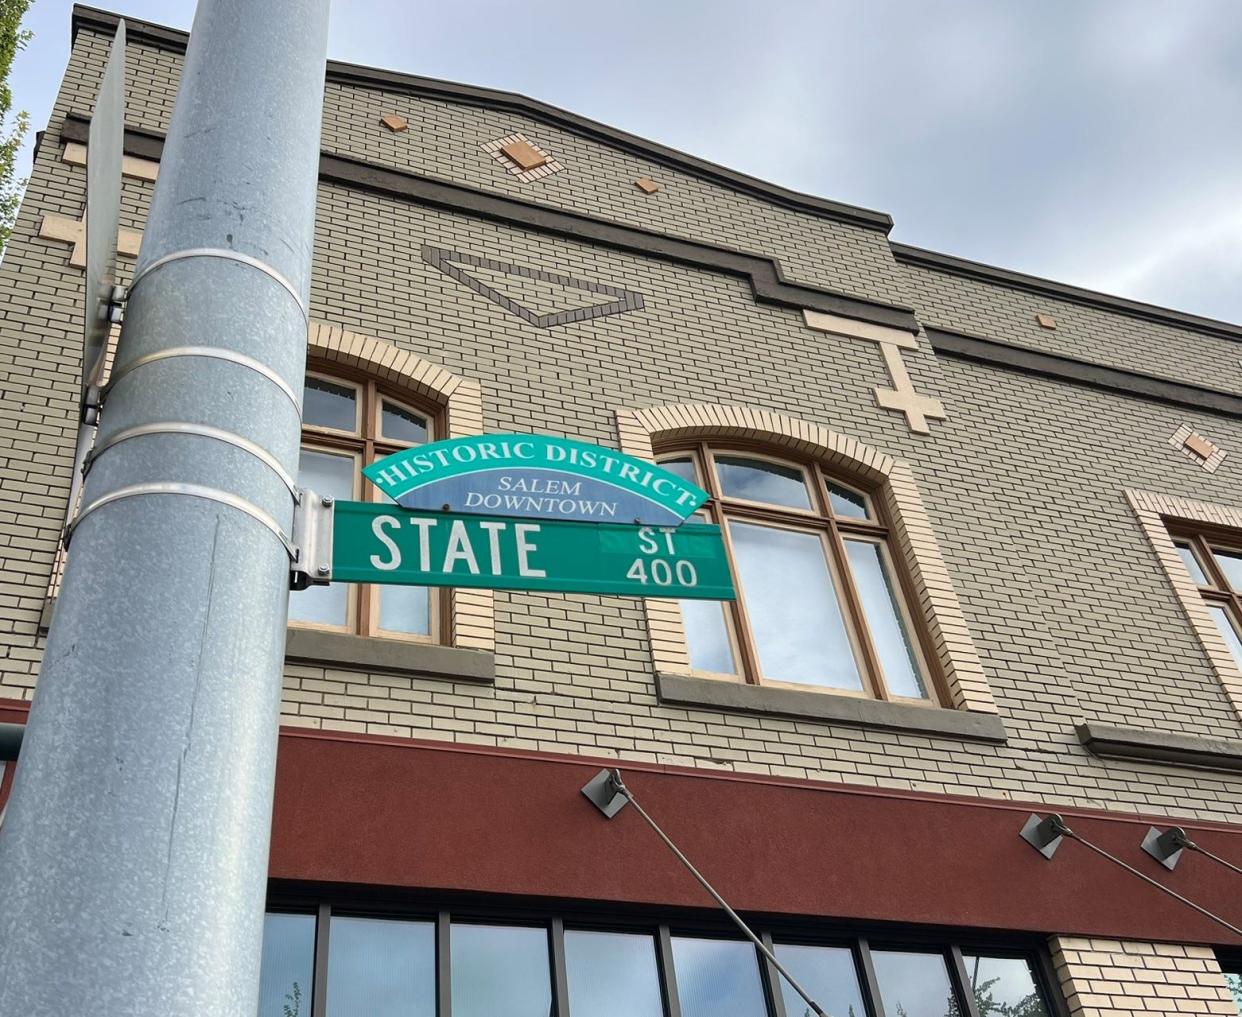 State Street is the only street without a directional suffix in Salem.